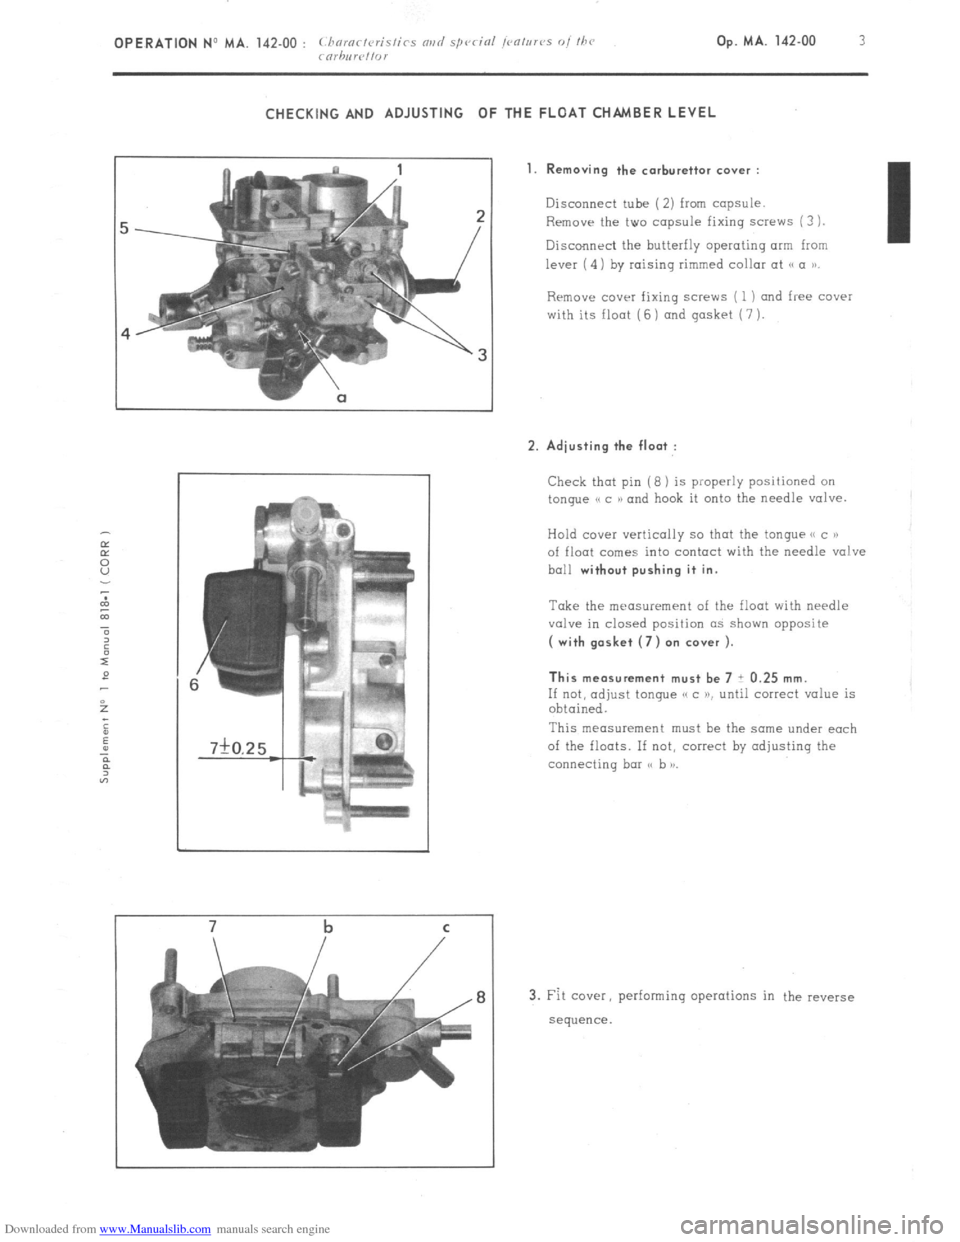 Citroen CX 1981 1.G Workshop Manual Downloaded from www.Manualslib.com manuals search engine OPERATION No MA. 142.00 : (.hornrt<,rislirs o,,d s,~“cinl ,<‘“,ur“s o! the Op. MA. 142.00 I( 
rnrhrclfo, 
CHECKING AND ADJUSTING OF THE